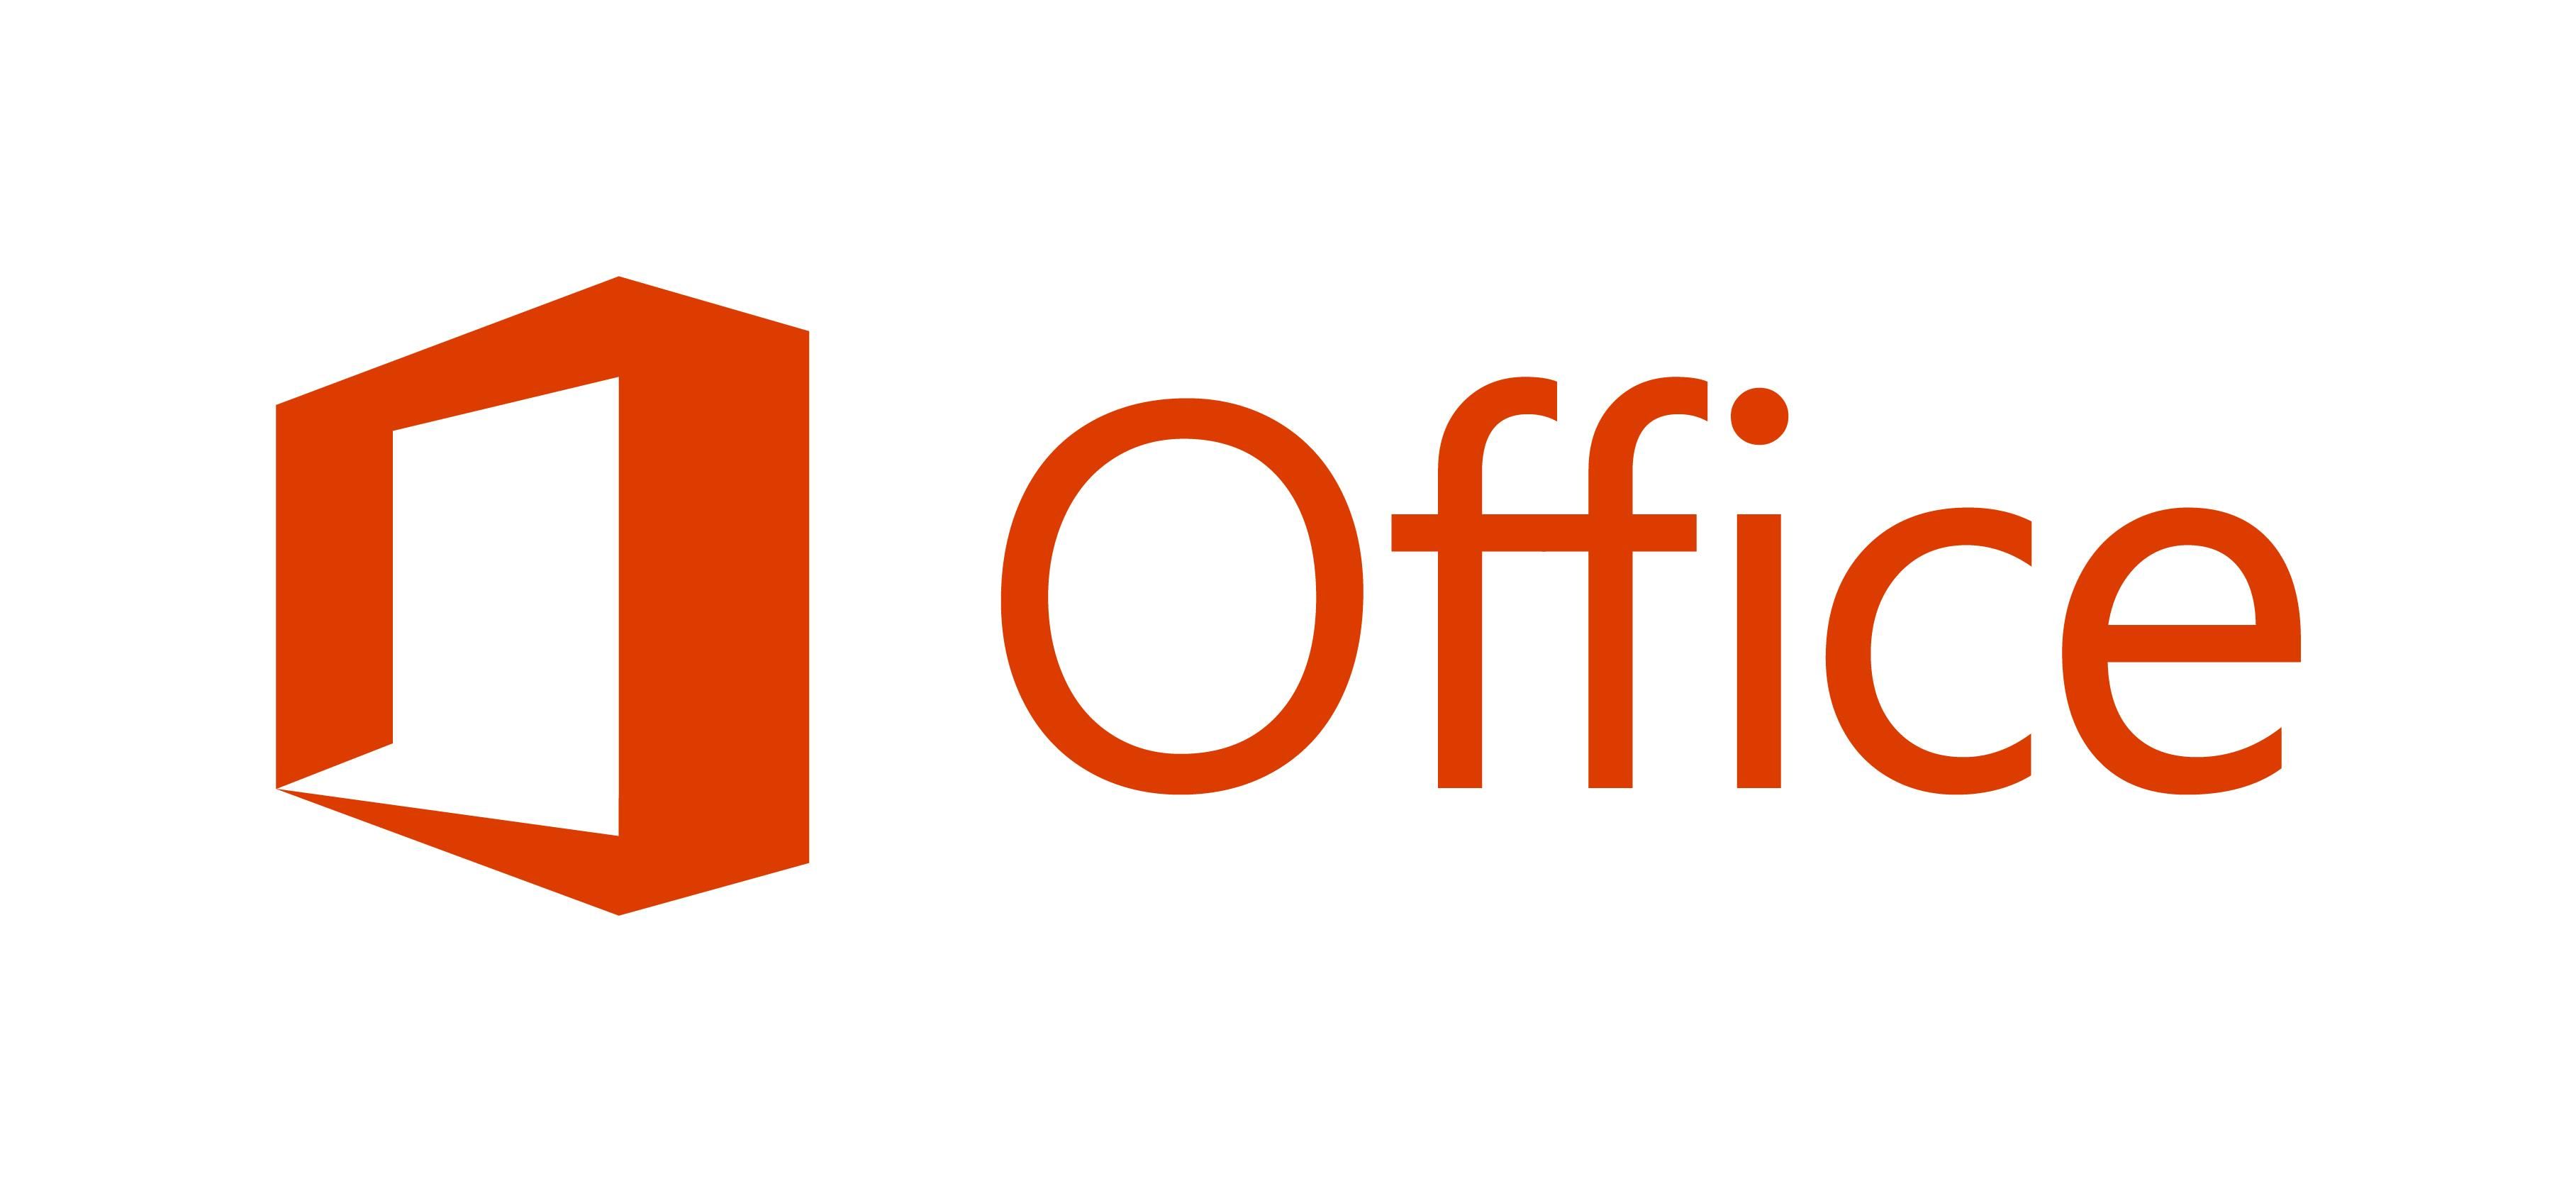 download microsoft office 365 student torrents